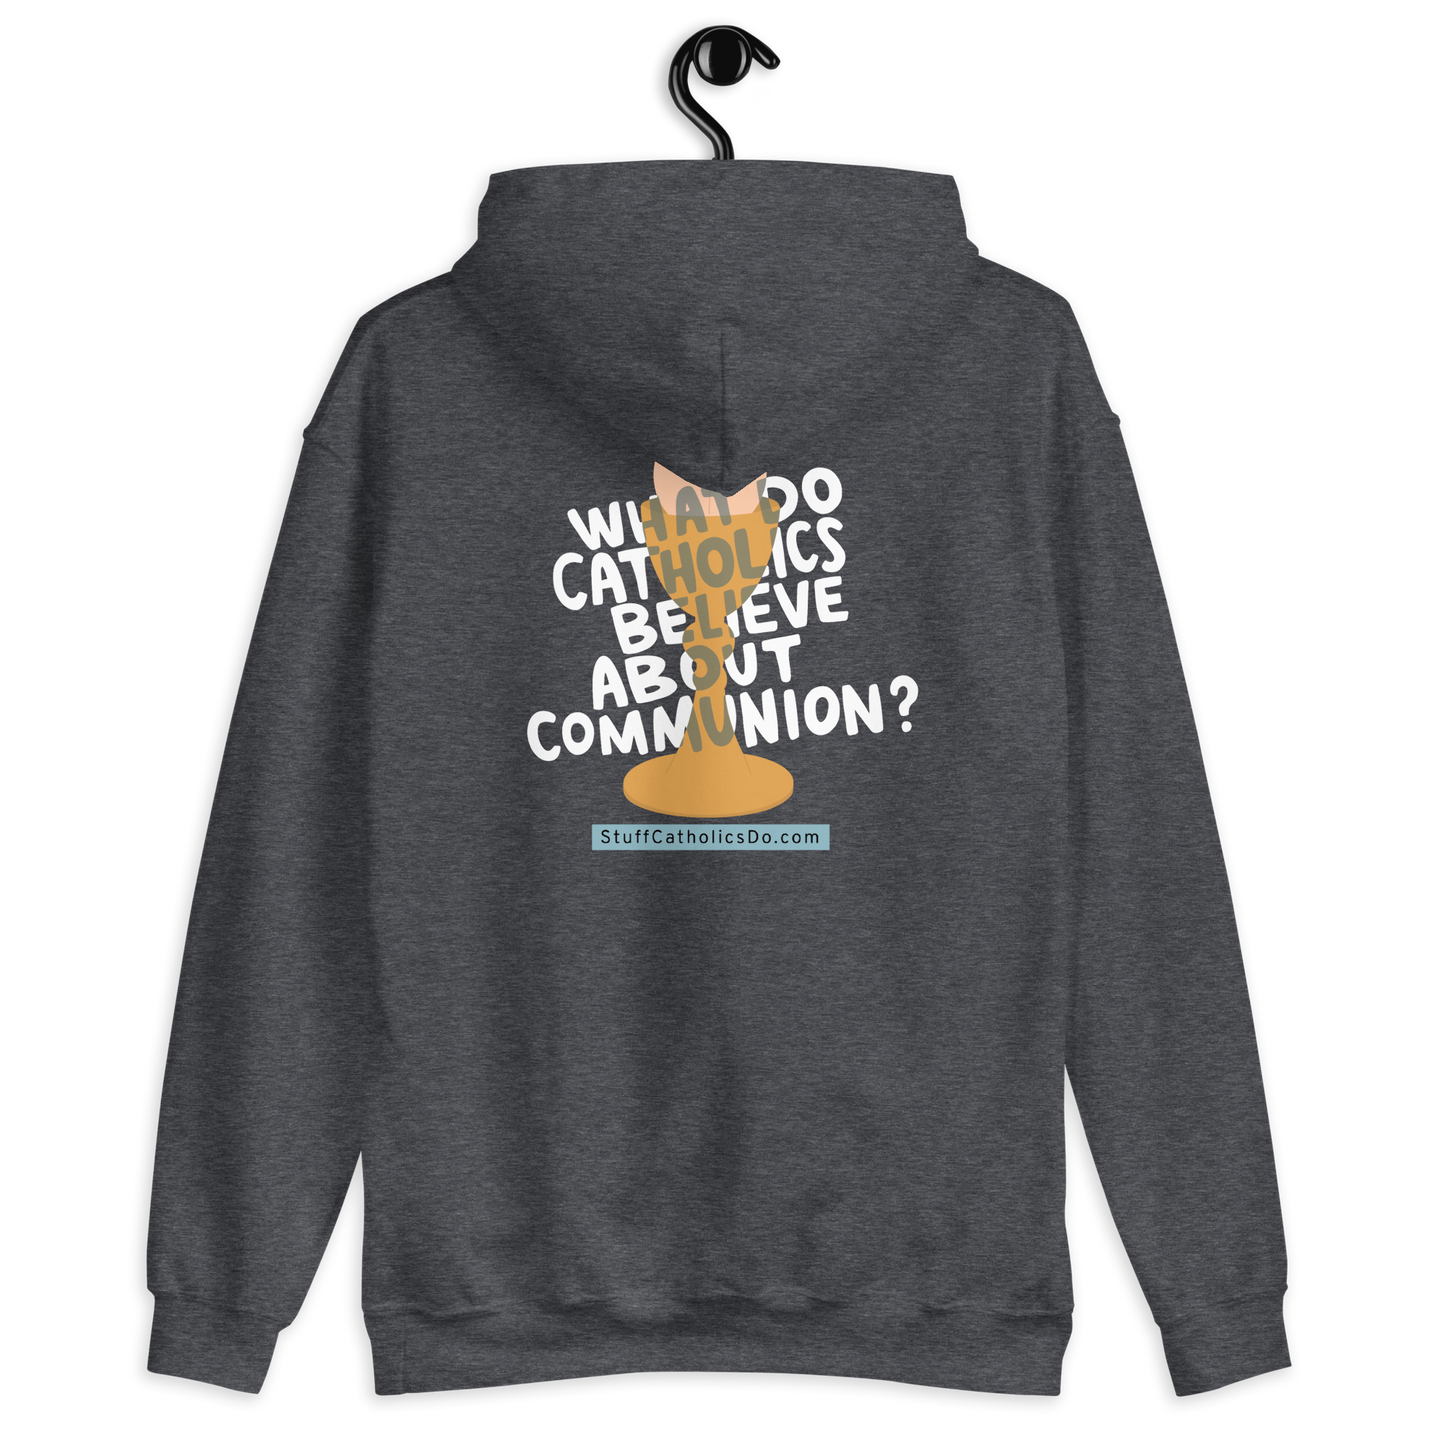 "What Do Catholics Believe About Communion?" Hoodie - Front and Back